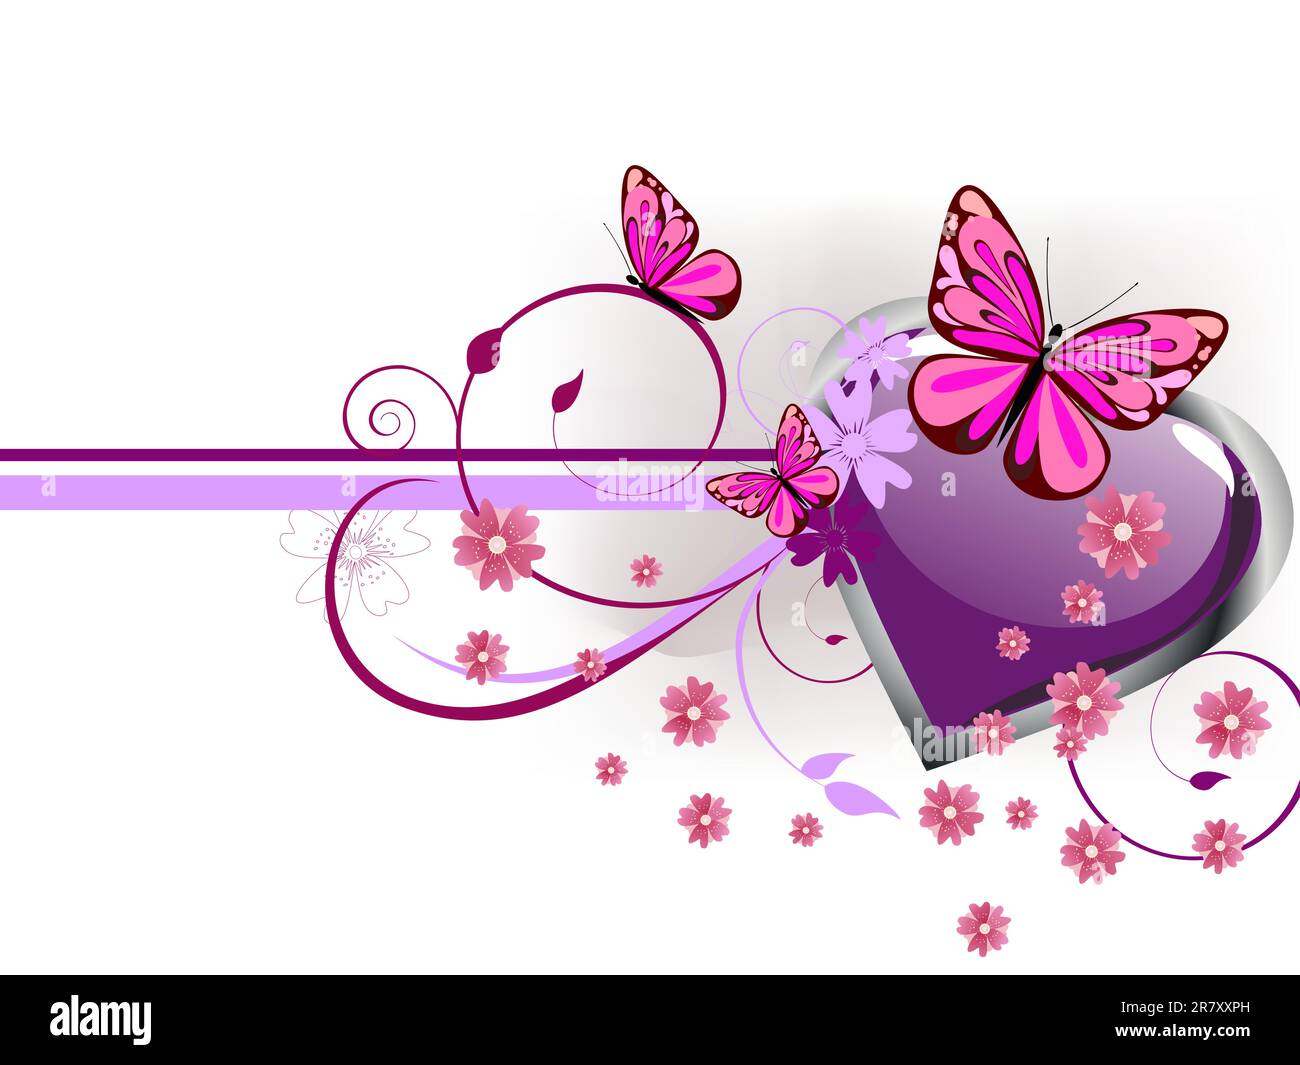 vector illustration of a purple heart and colorful butterflies on a floral background Stock Vector